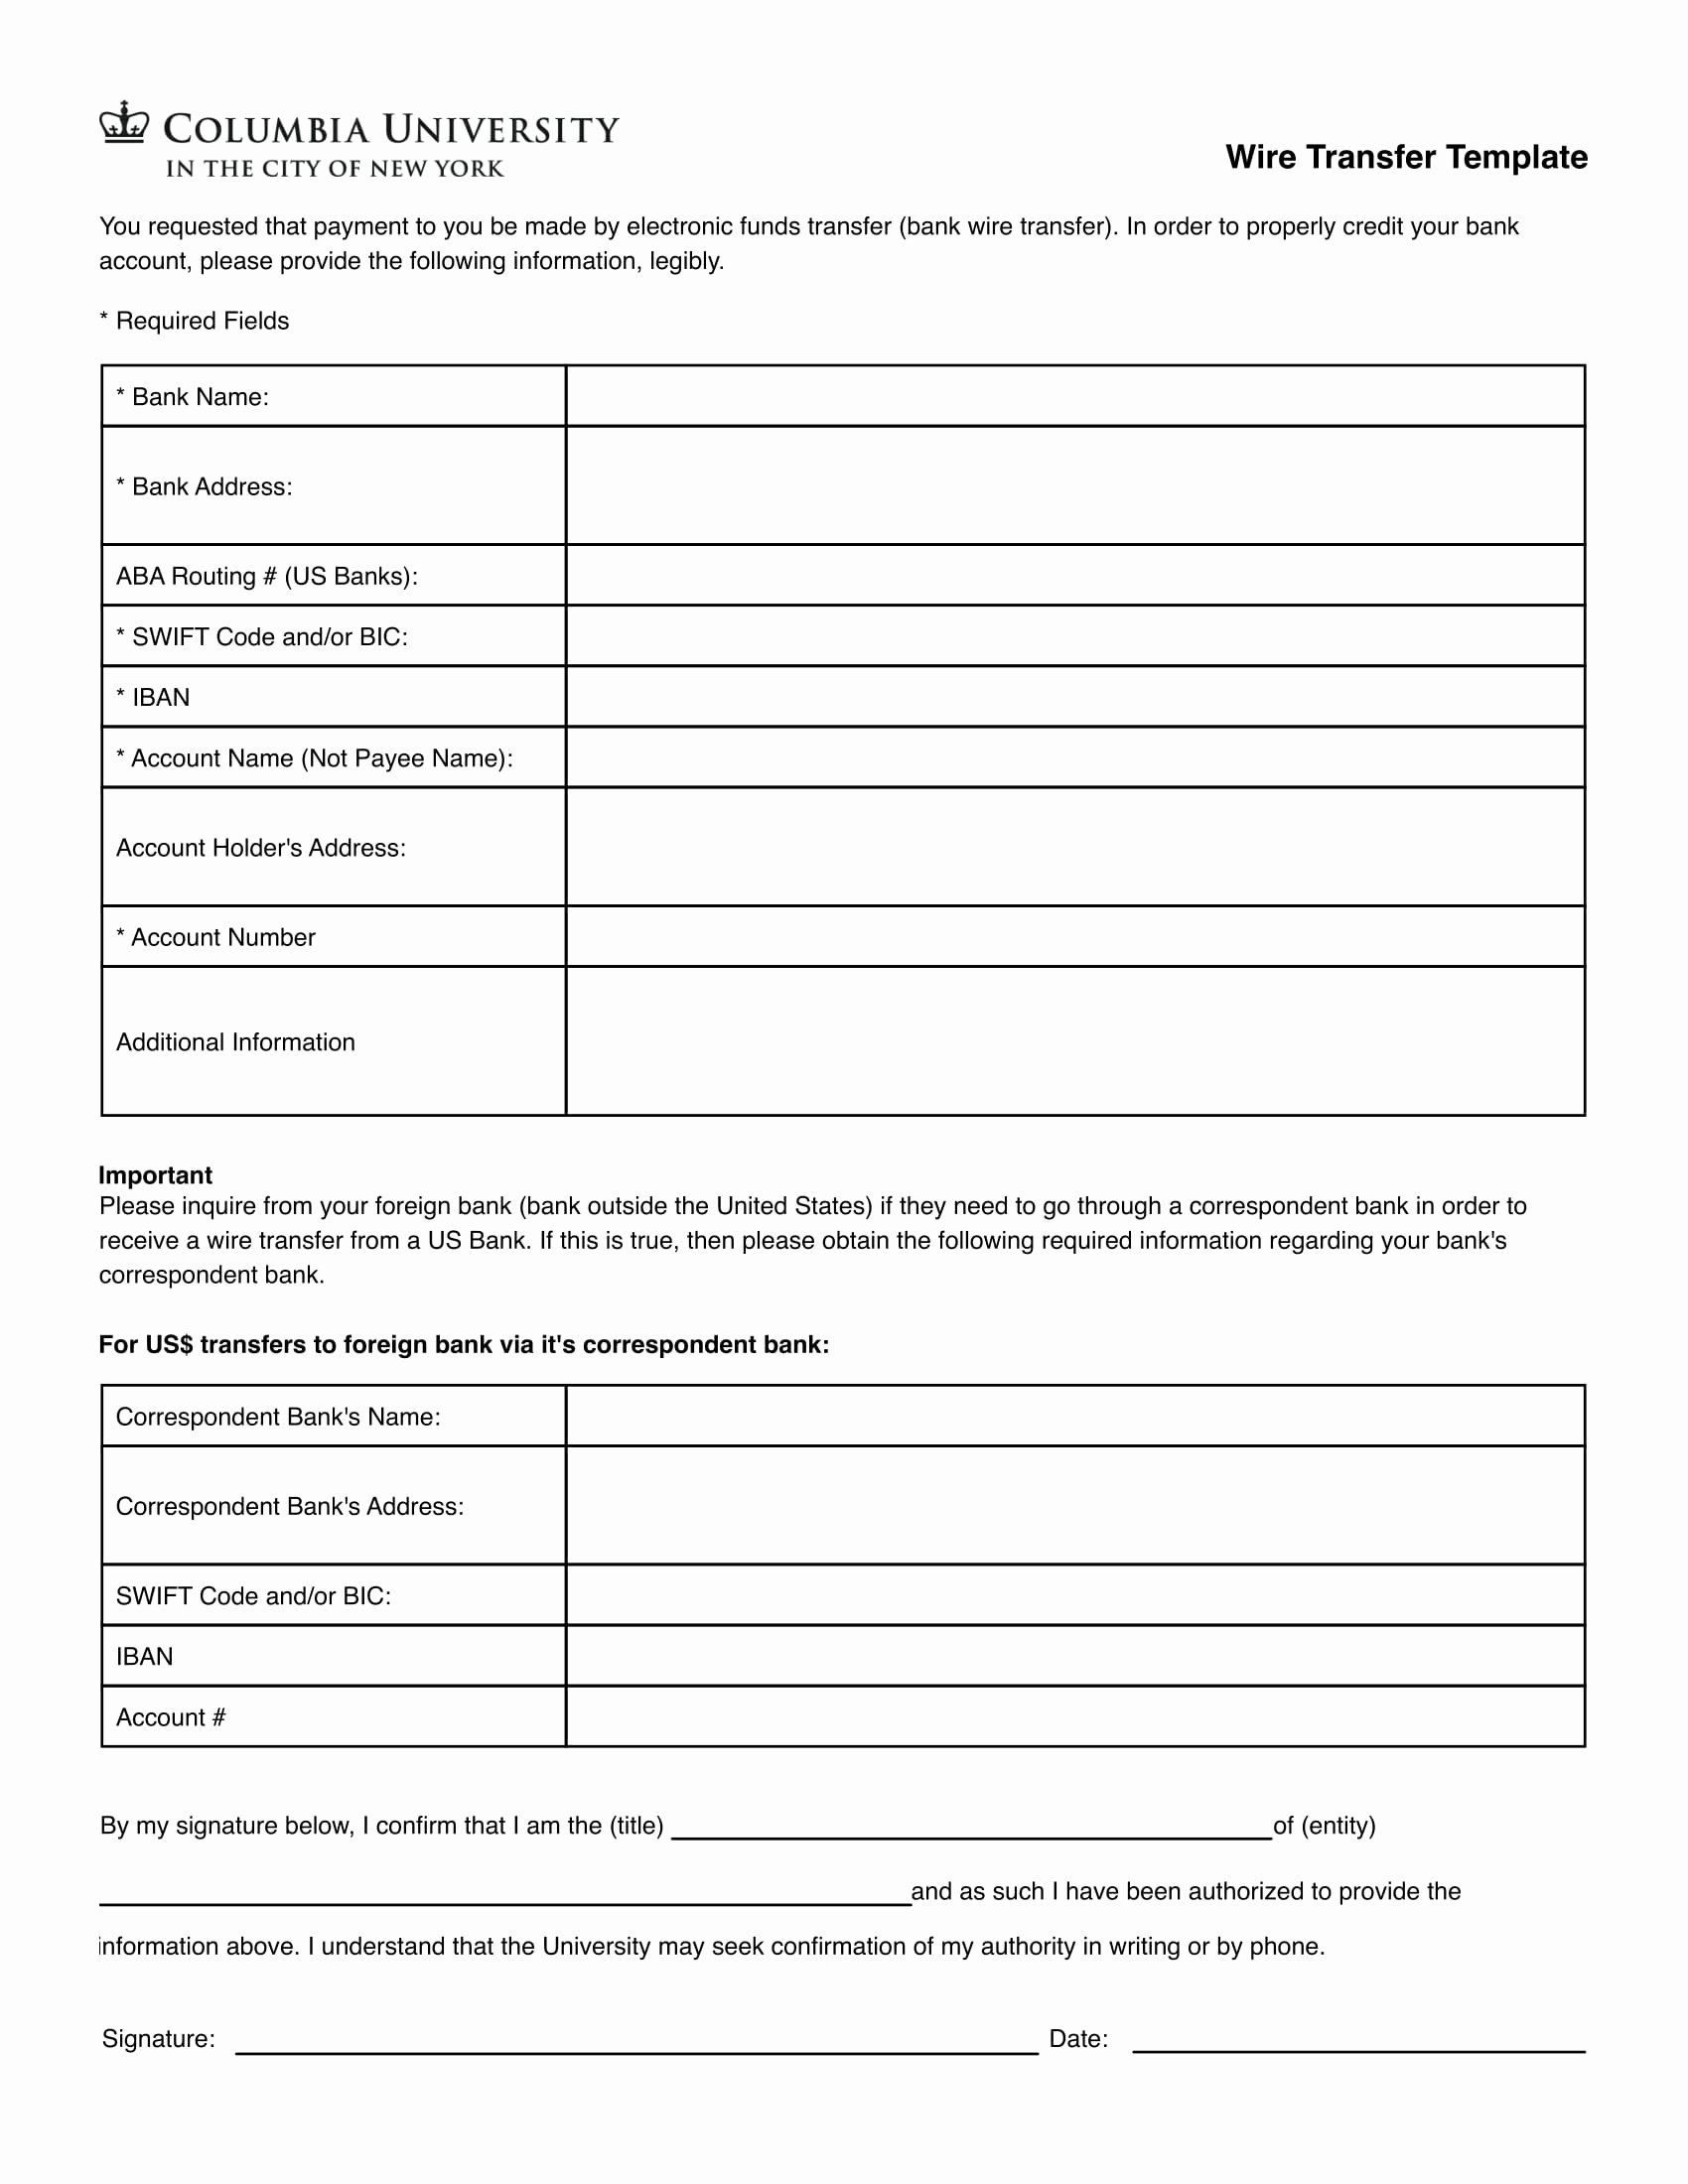 Wire Transfer Instructions Template Elegant 4 Wire Transfer Instructions forms Pdf